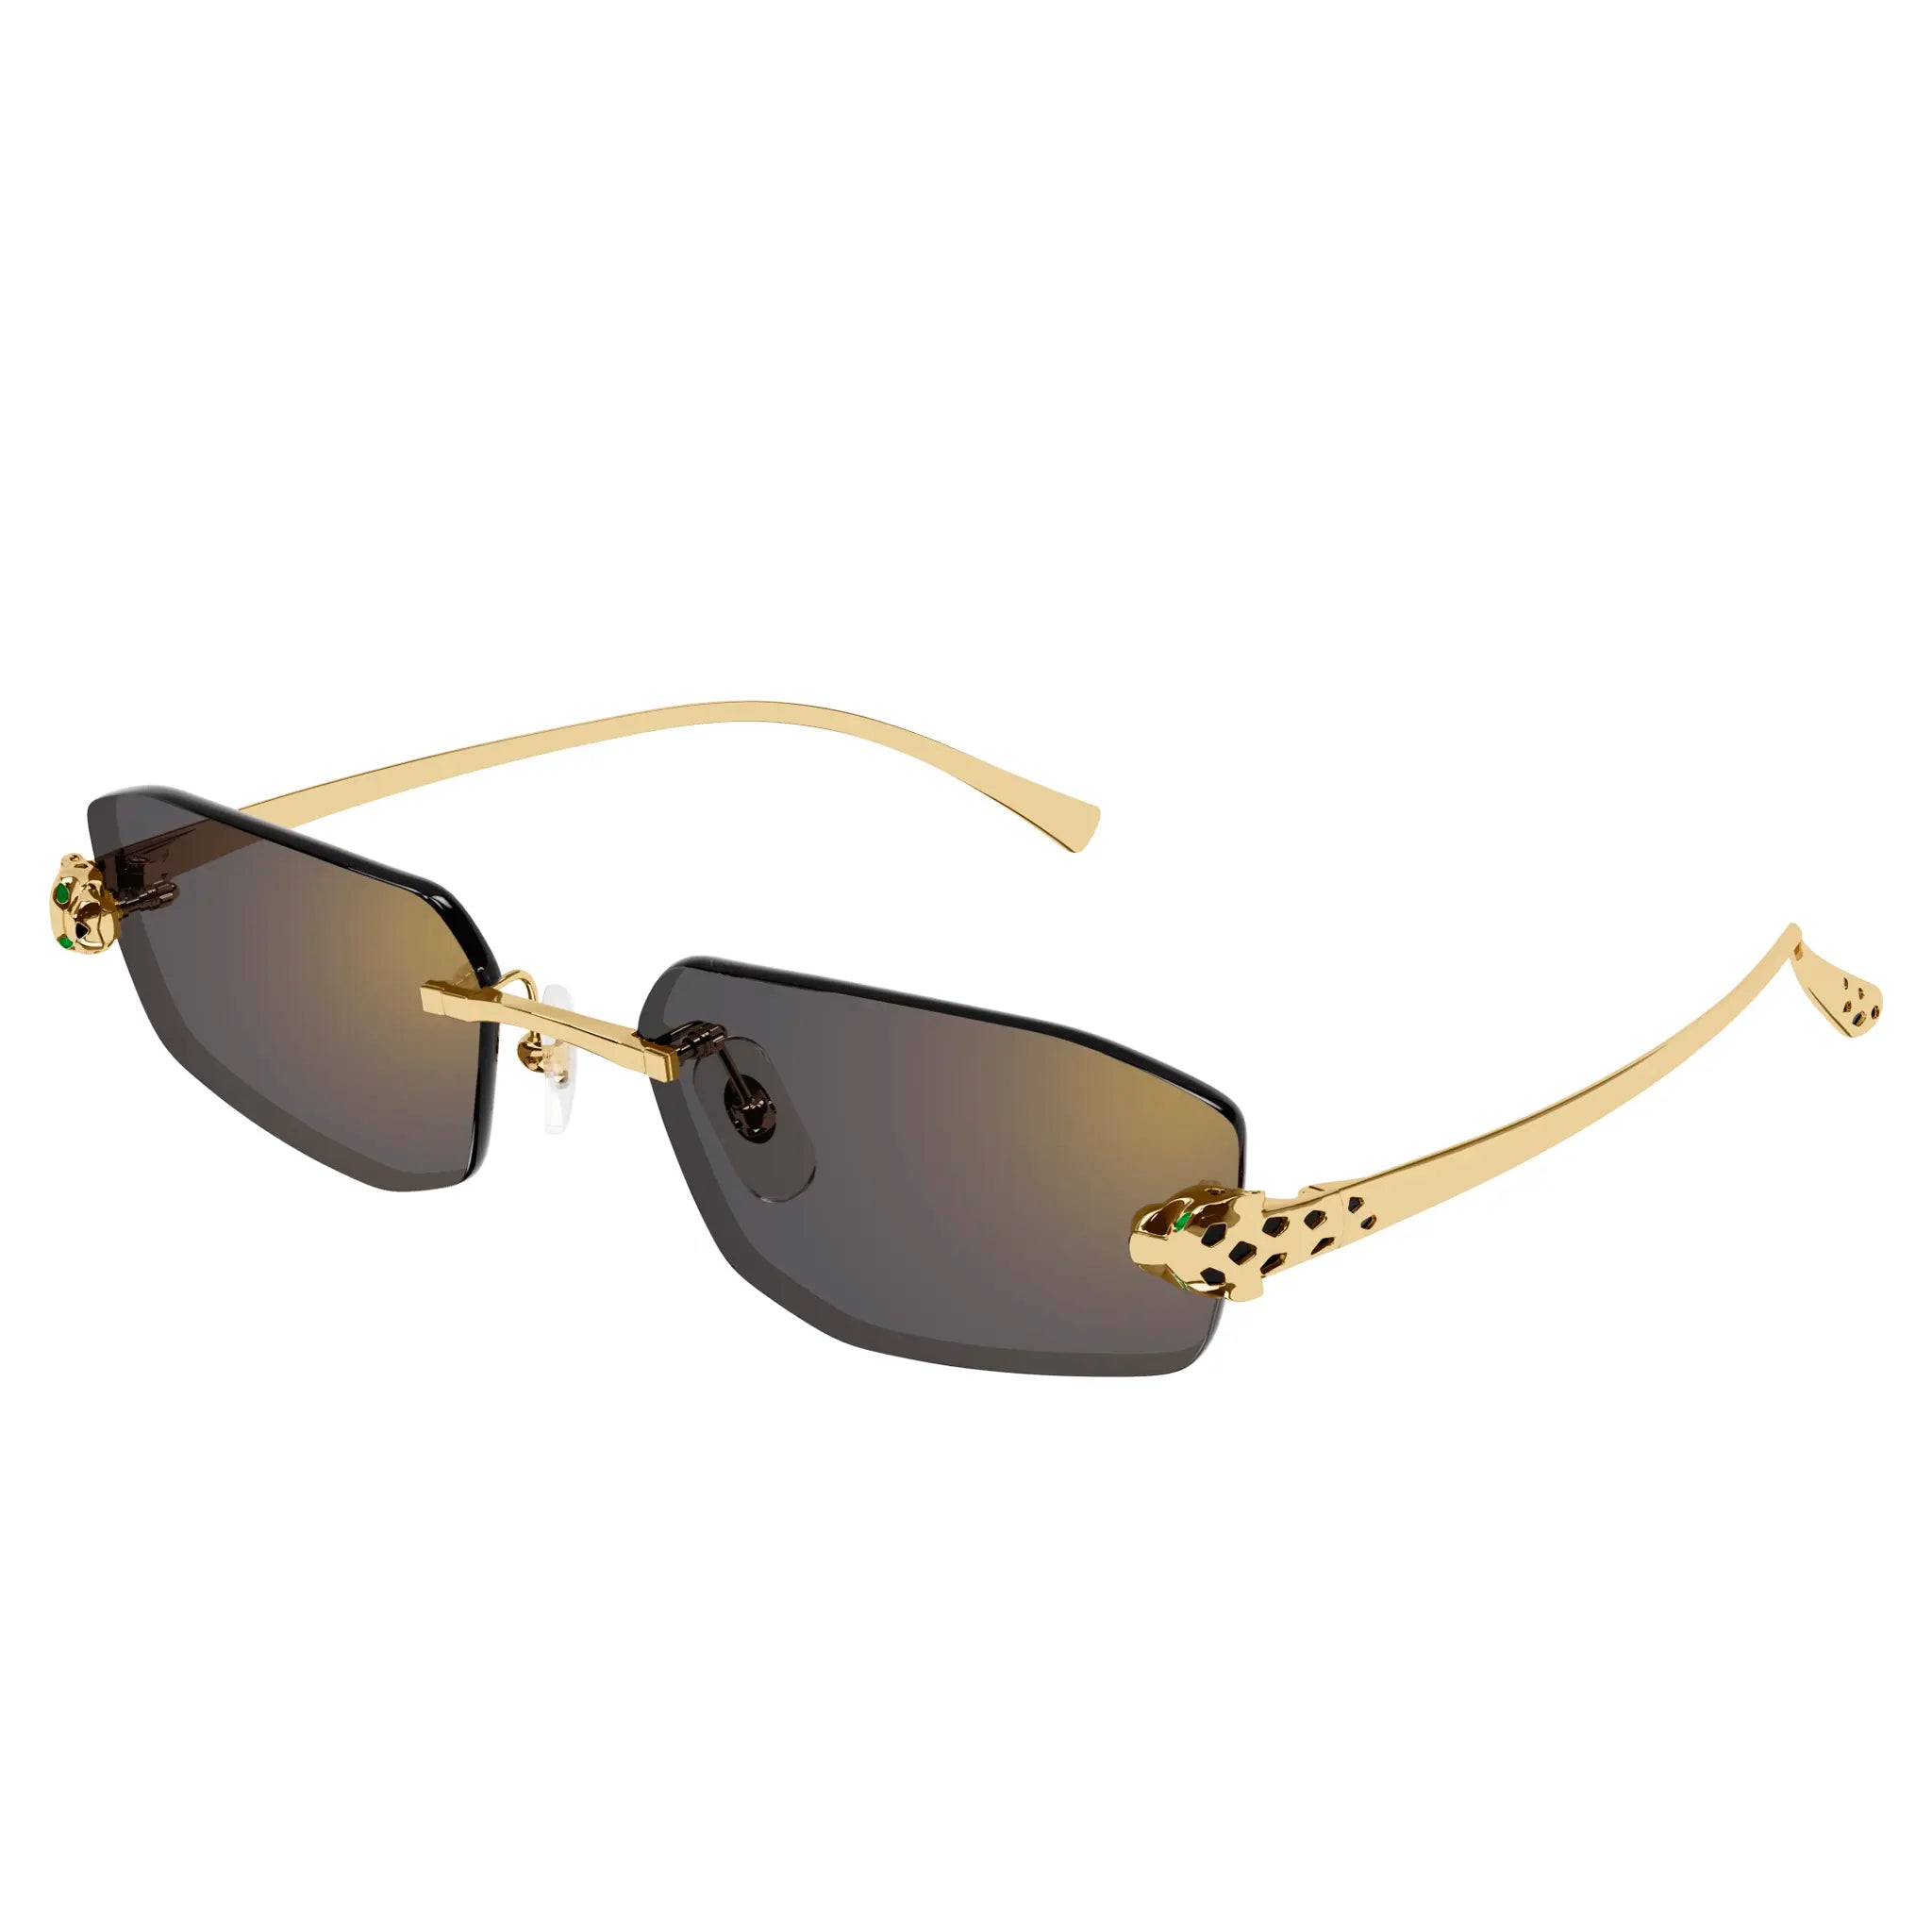 Front Side view of Cartier Eyewear CT0474S-001 Panthere De Cartier Gold Grey Rimless Sunglasses